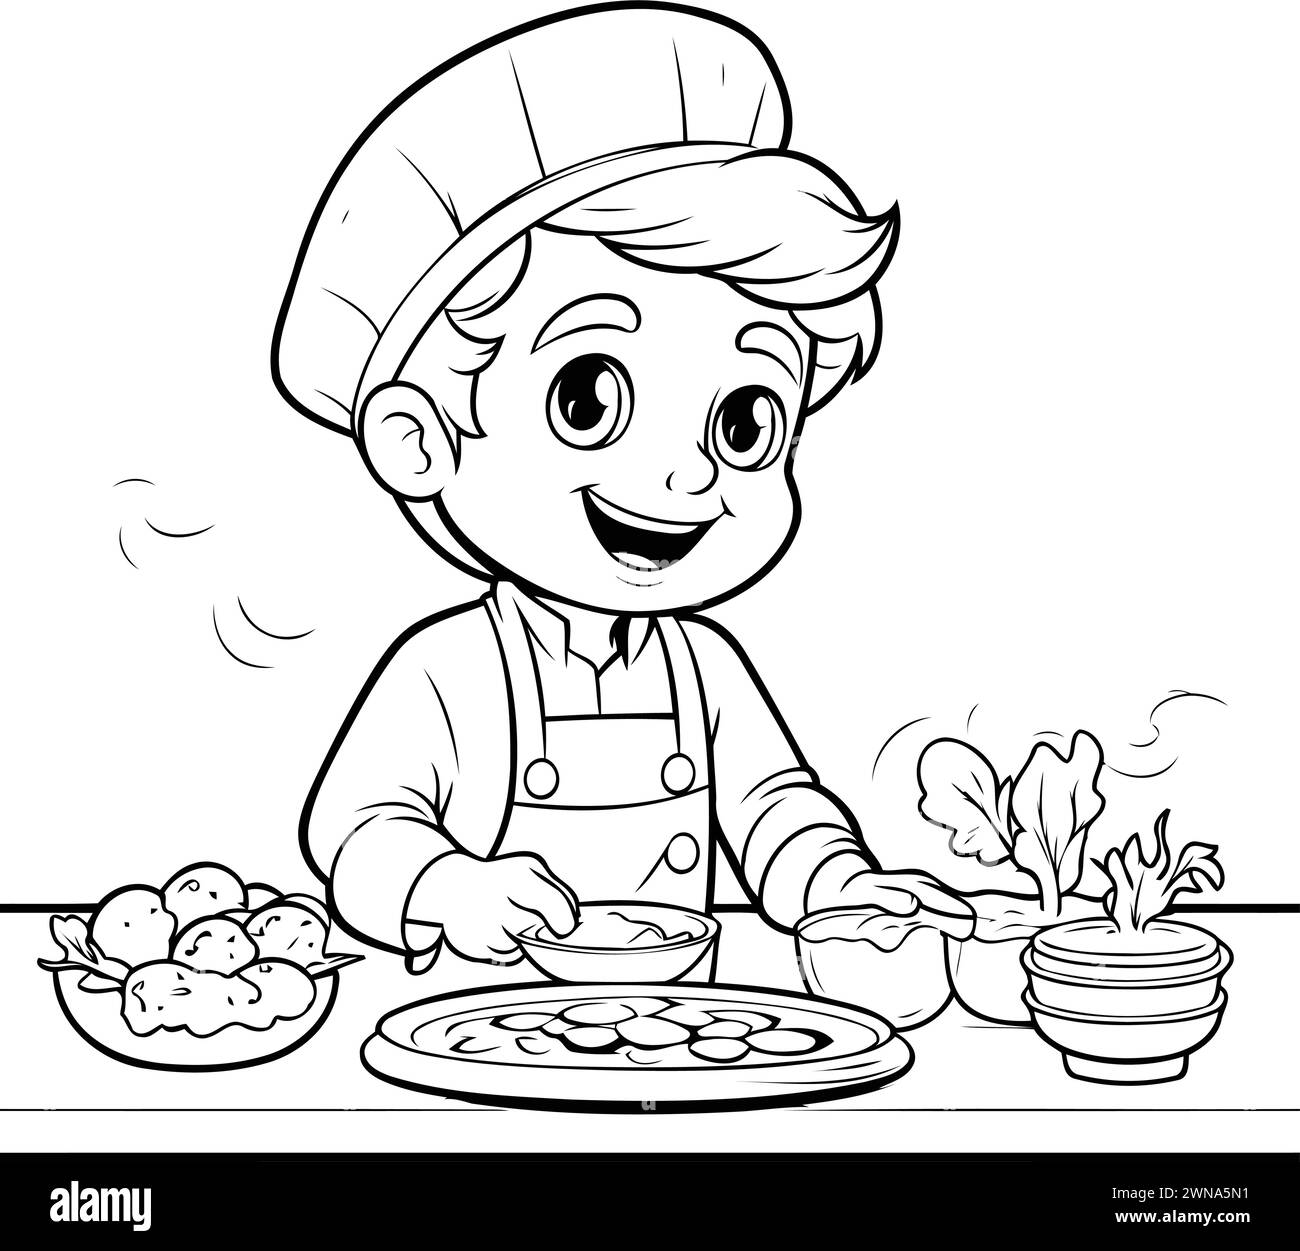 Black and White Cartoon Illustration of Little Chef Boy Cooking Food for Coloring Book Stock Vector